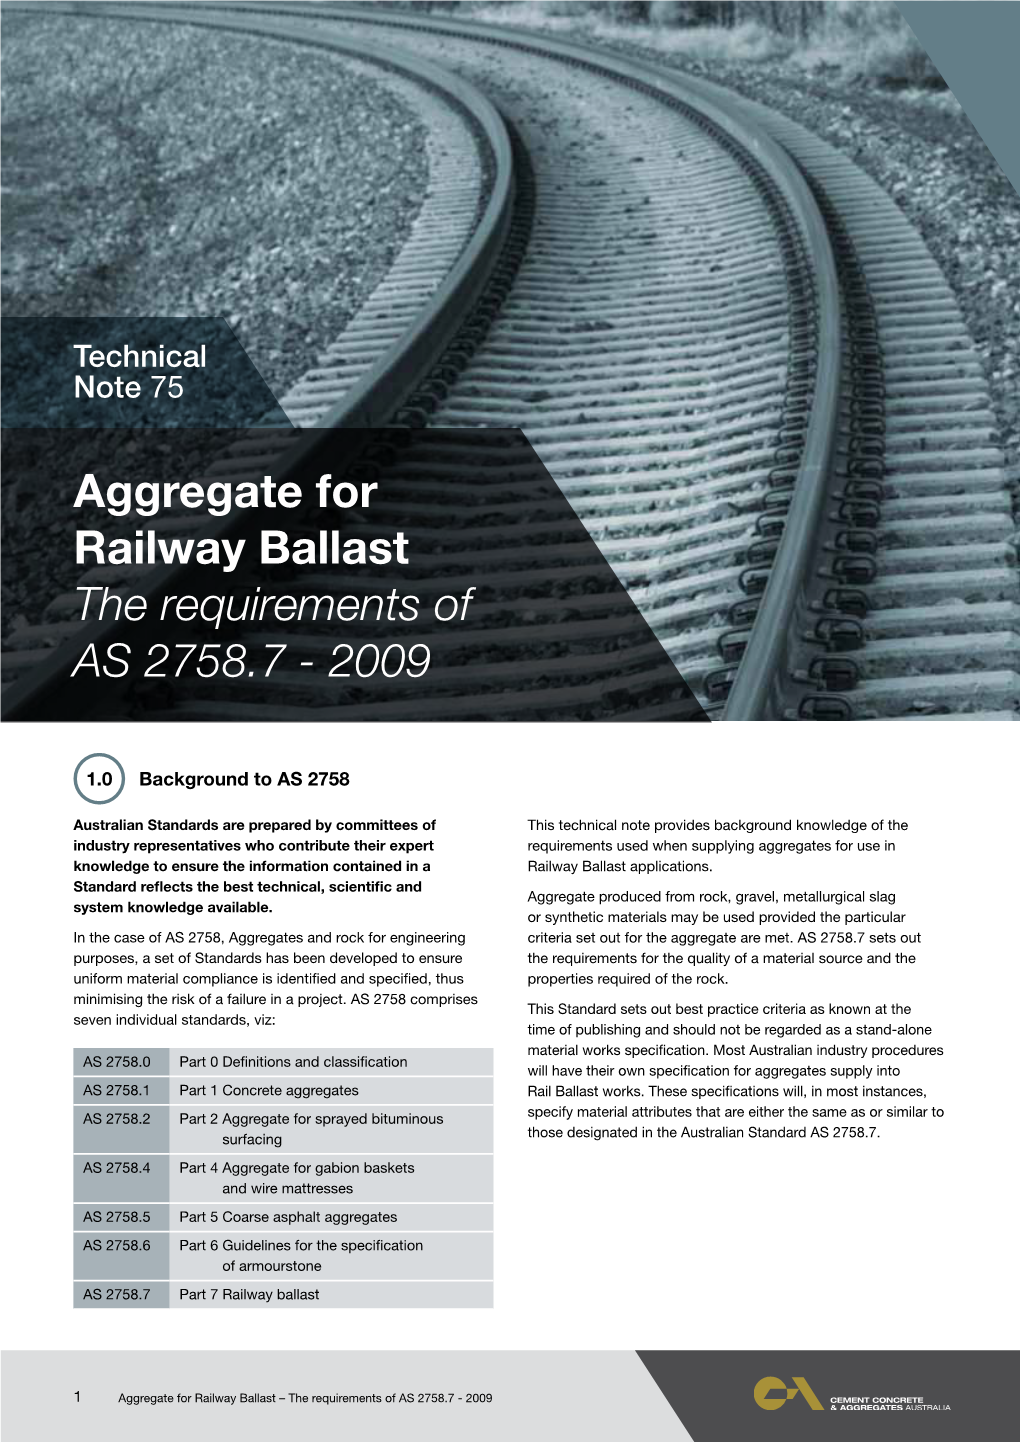 Aggregate for Railway Ballast the Requirements of AS 2758.7 - 2009